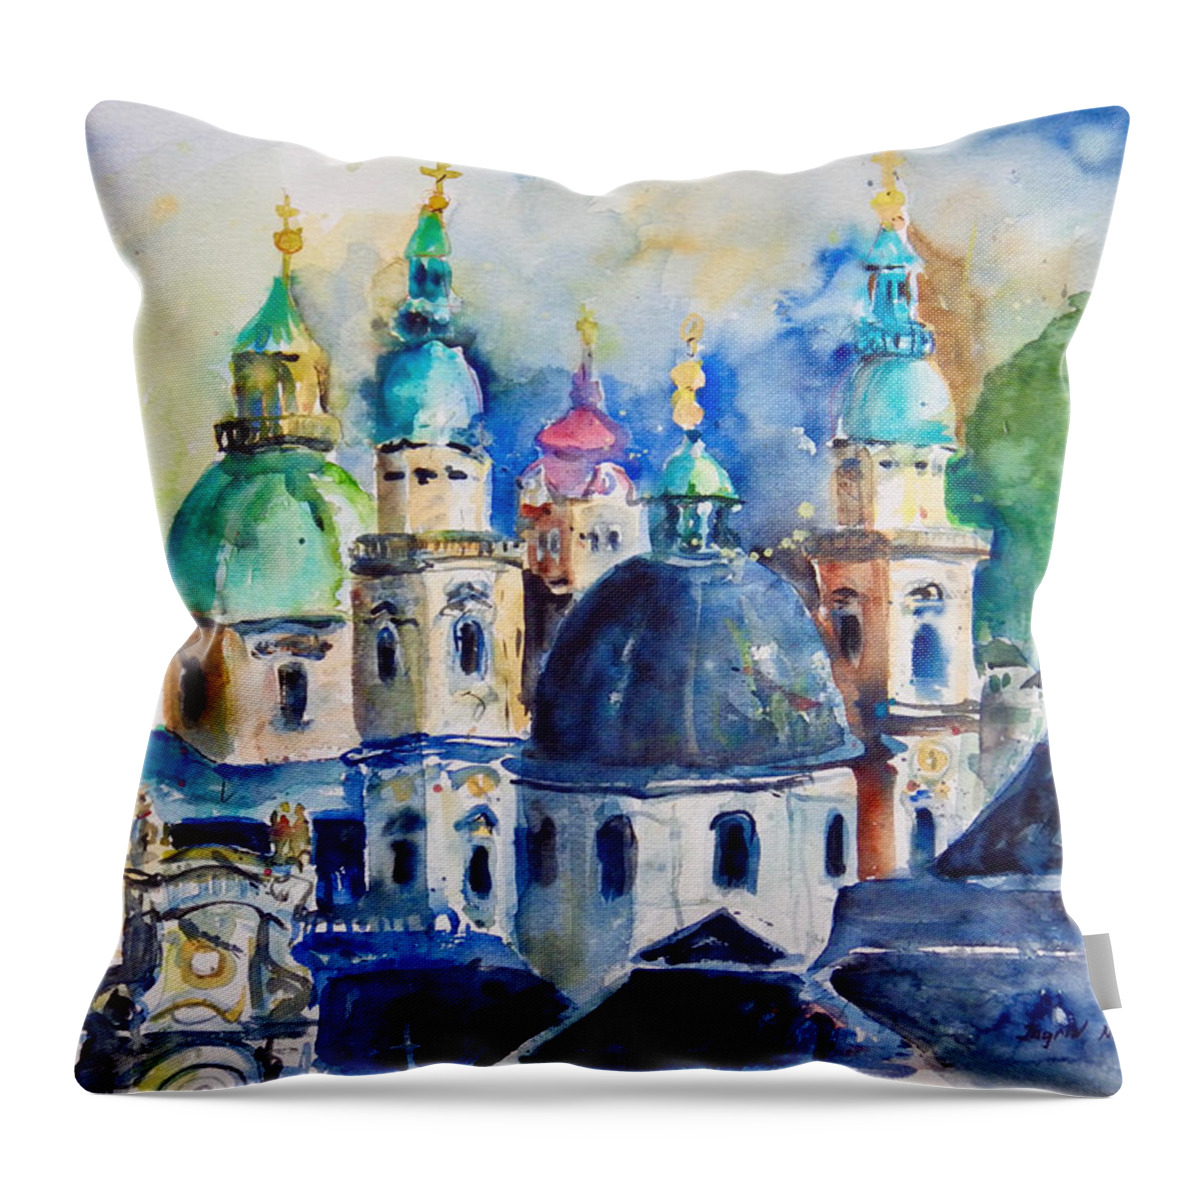 Cityscape Throw Pillow featuring the painting Watercolor Series No. 247 by Ingrid Dohm